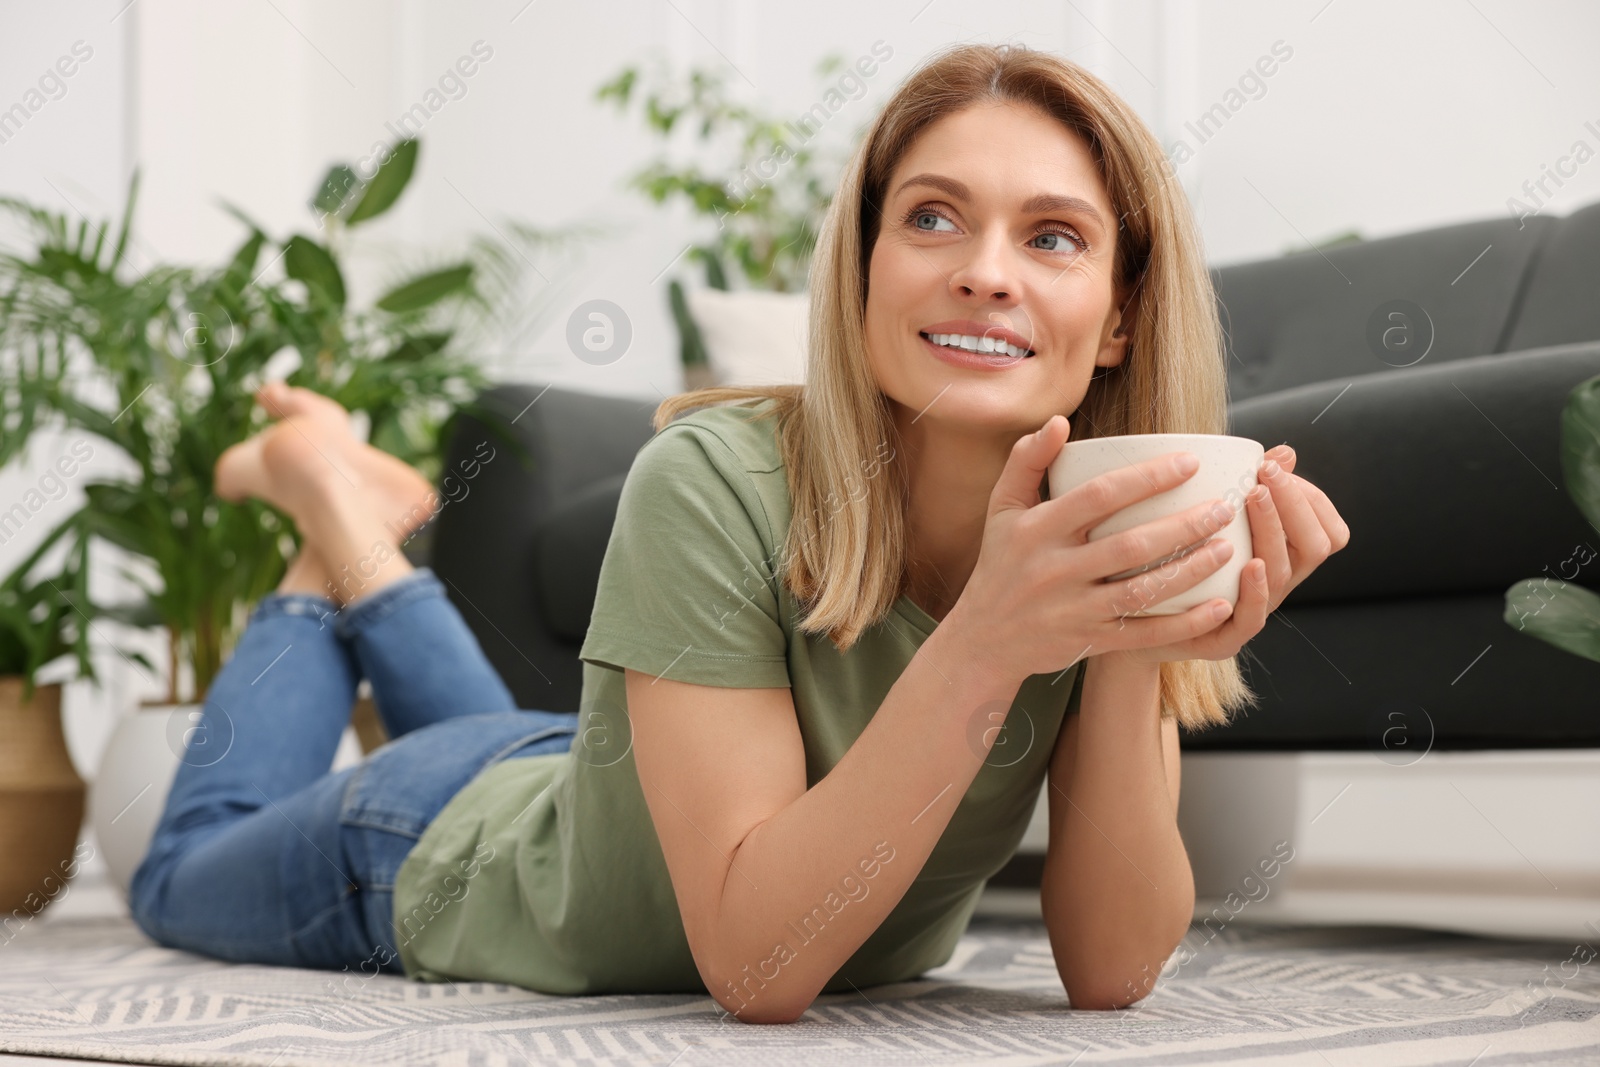 Photo of Woman holding cup of drink on floor in room with beautiful houseplants